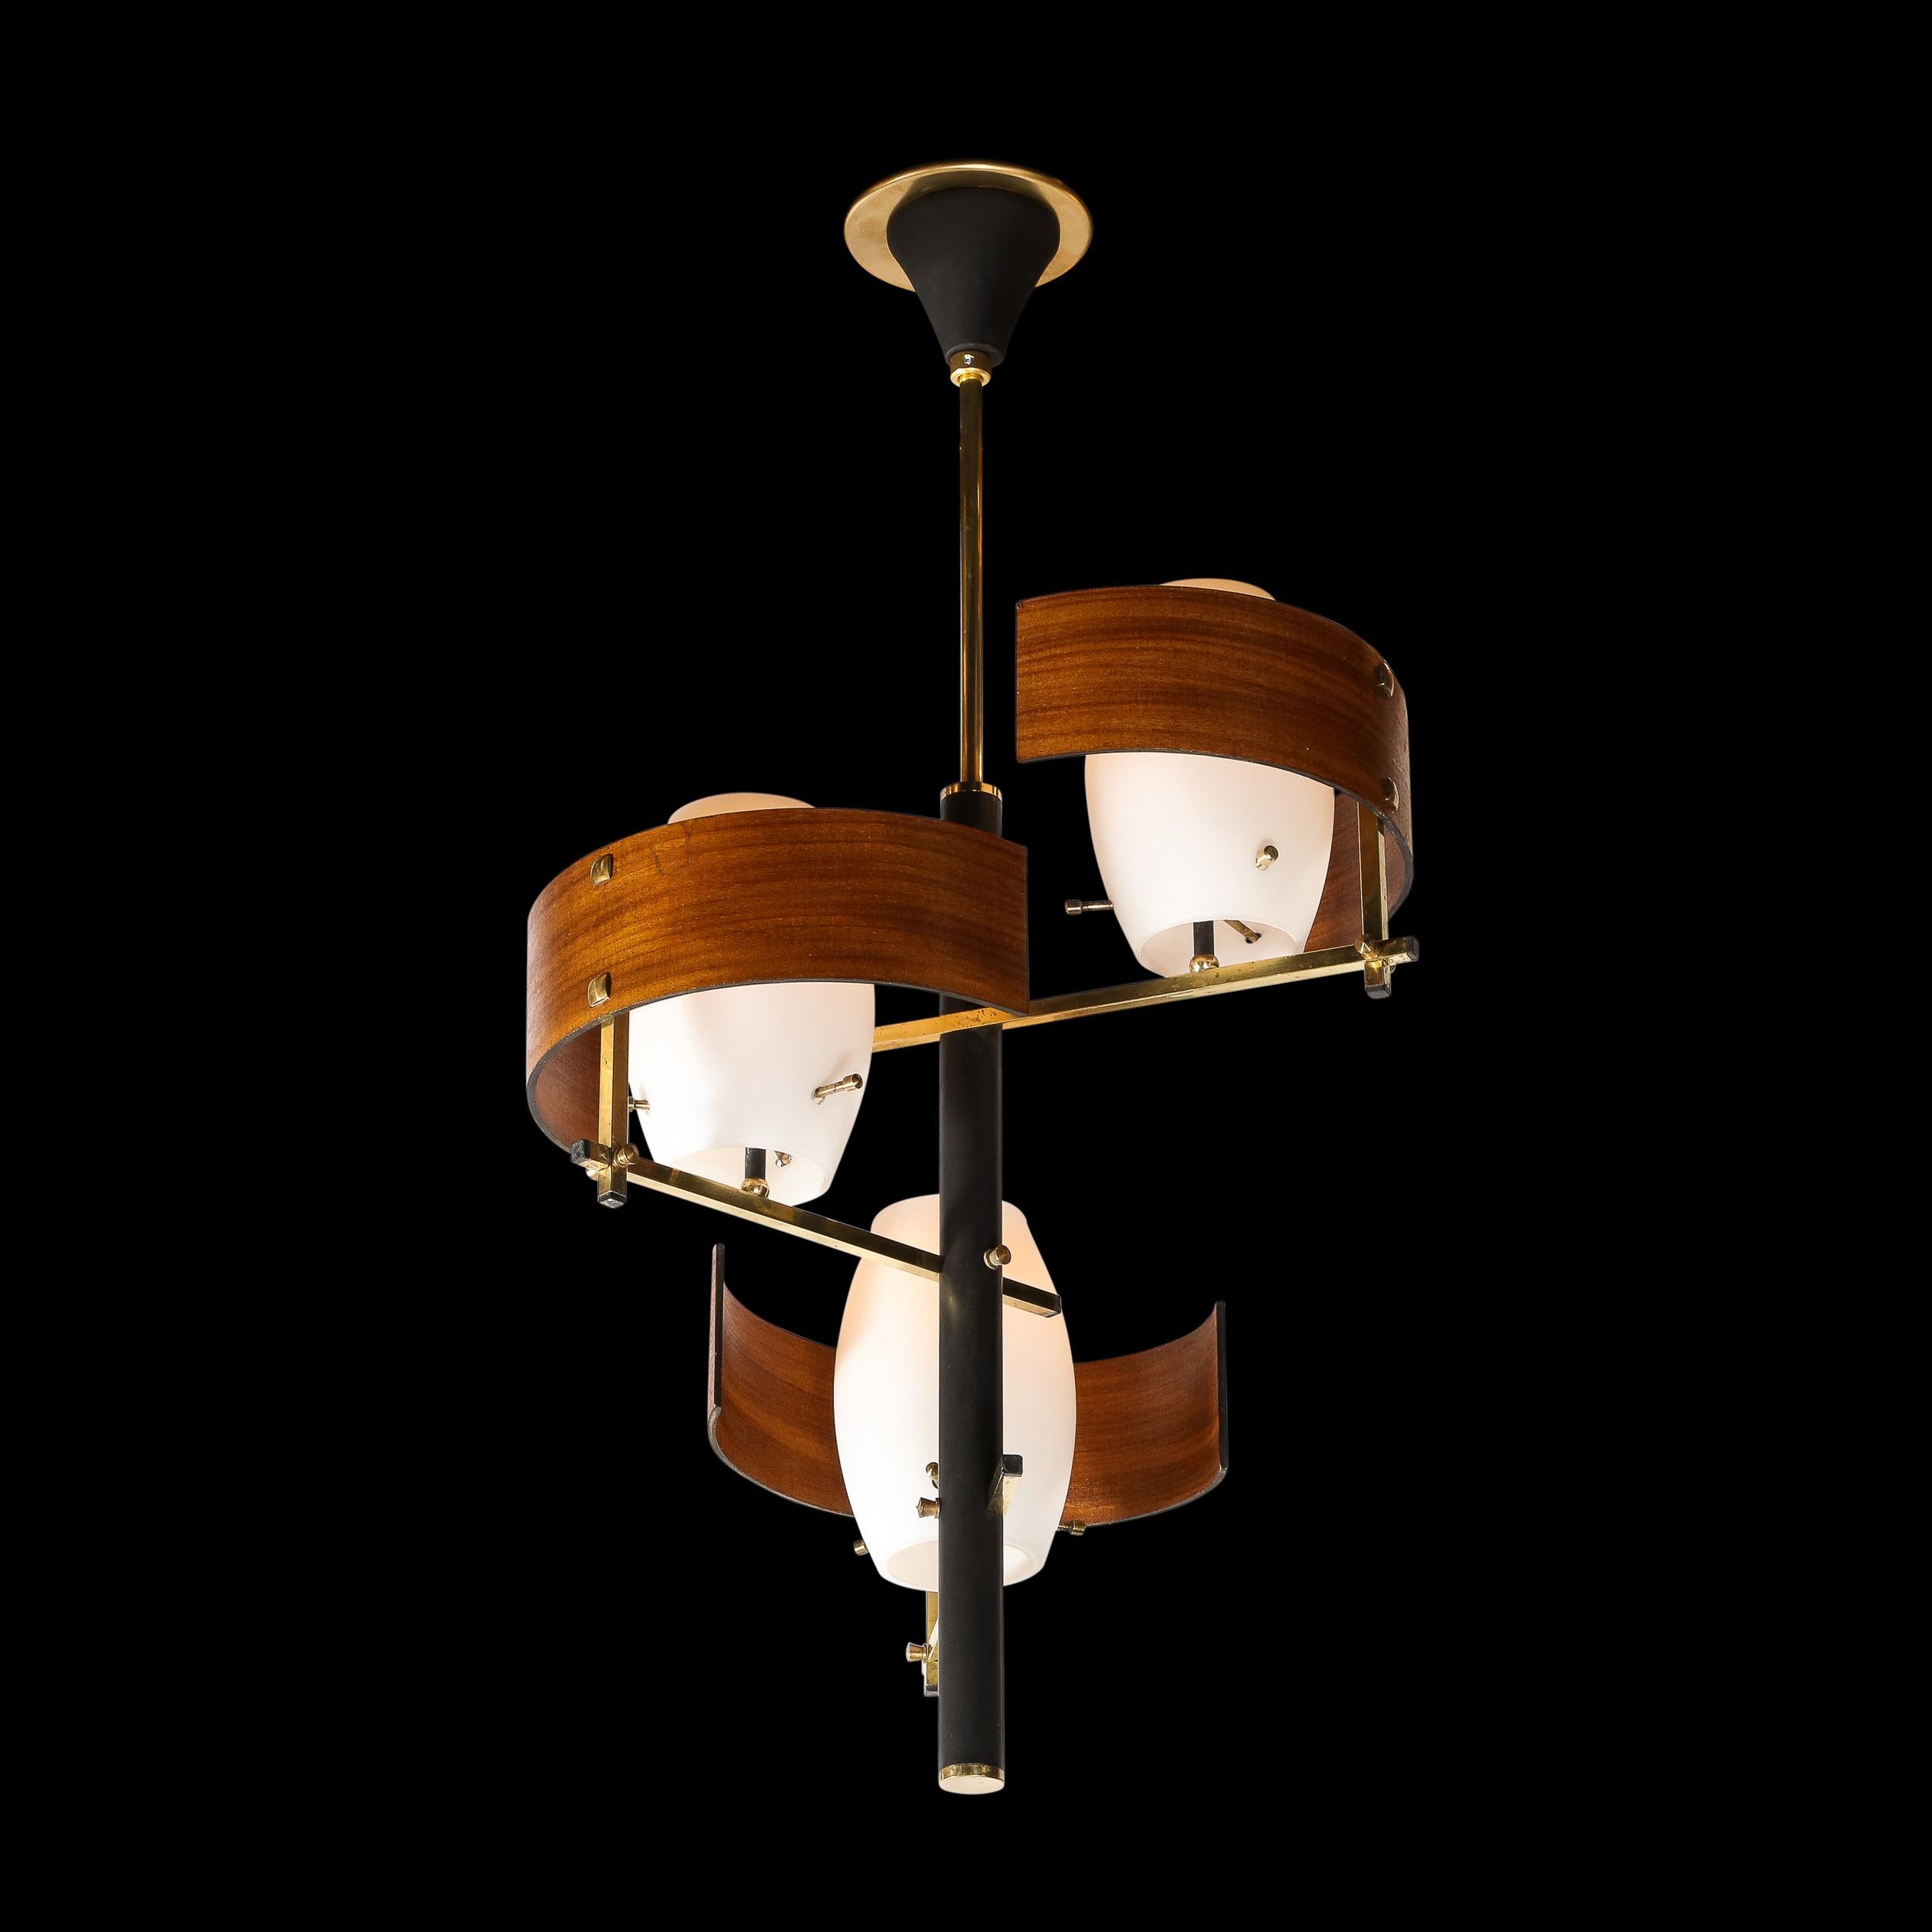 This elegant Mid-Century Modern pendant was realized in France circa 1960. It features three volumetric ovoid shades in a matte milk glass pierced through with cylindrical brass supports near their bases. The shades are affixed to brass arms that